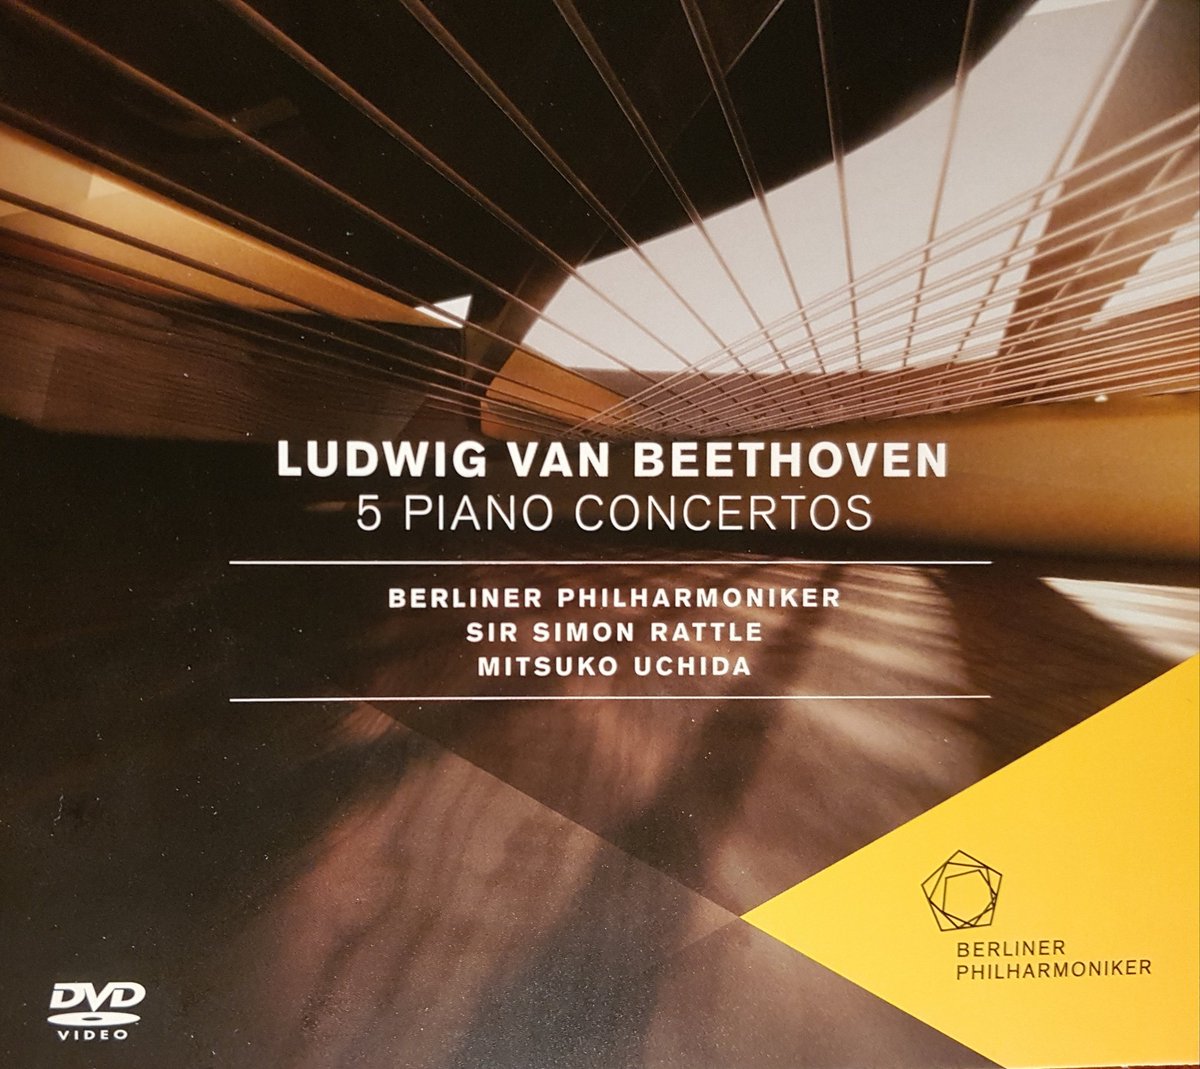 As the last performance of op. 58 Uchida & Rattle in Berlin.And this is all you can wish. From the very first thoughtful piano replique to the delighted ending of the rondo finale. It is so full of nuances, of colours, of deep emotion, all on a Beethovenian level. >